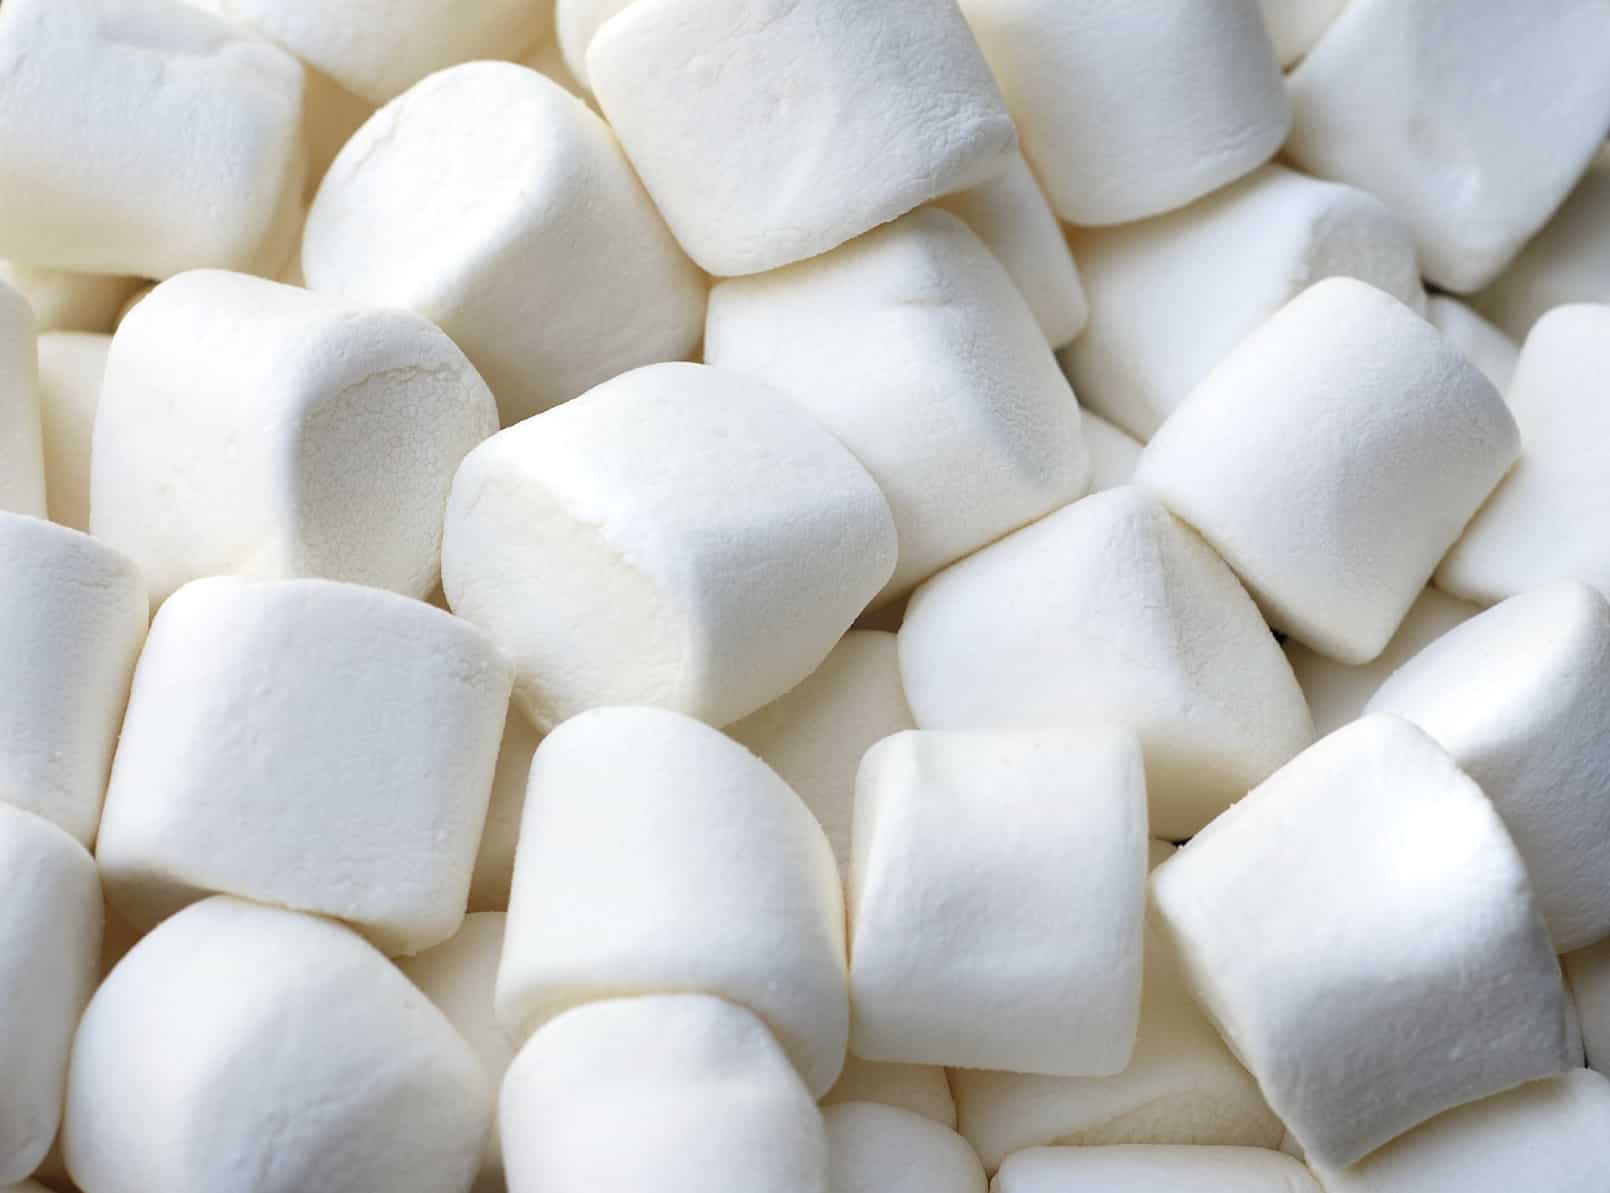 Marshmallows used to soothe sore throat and cough